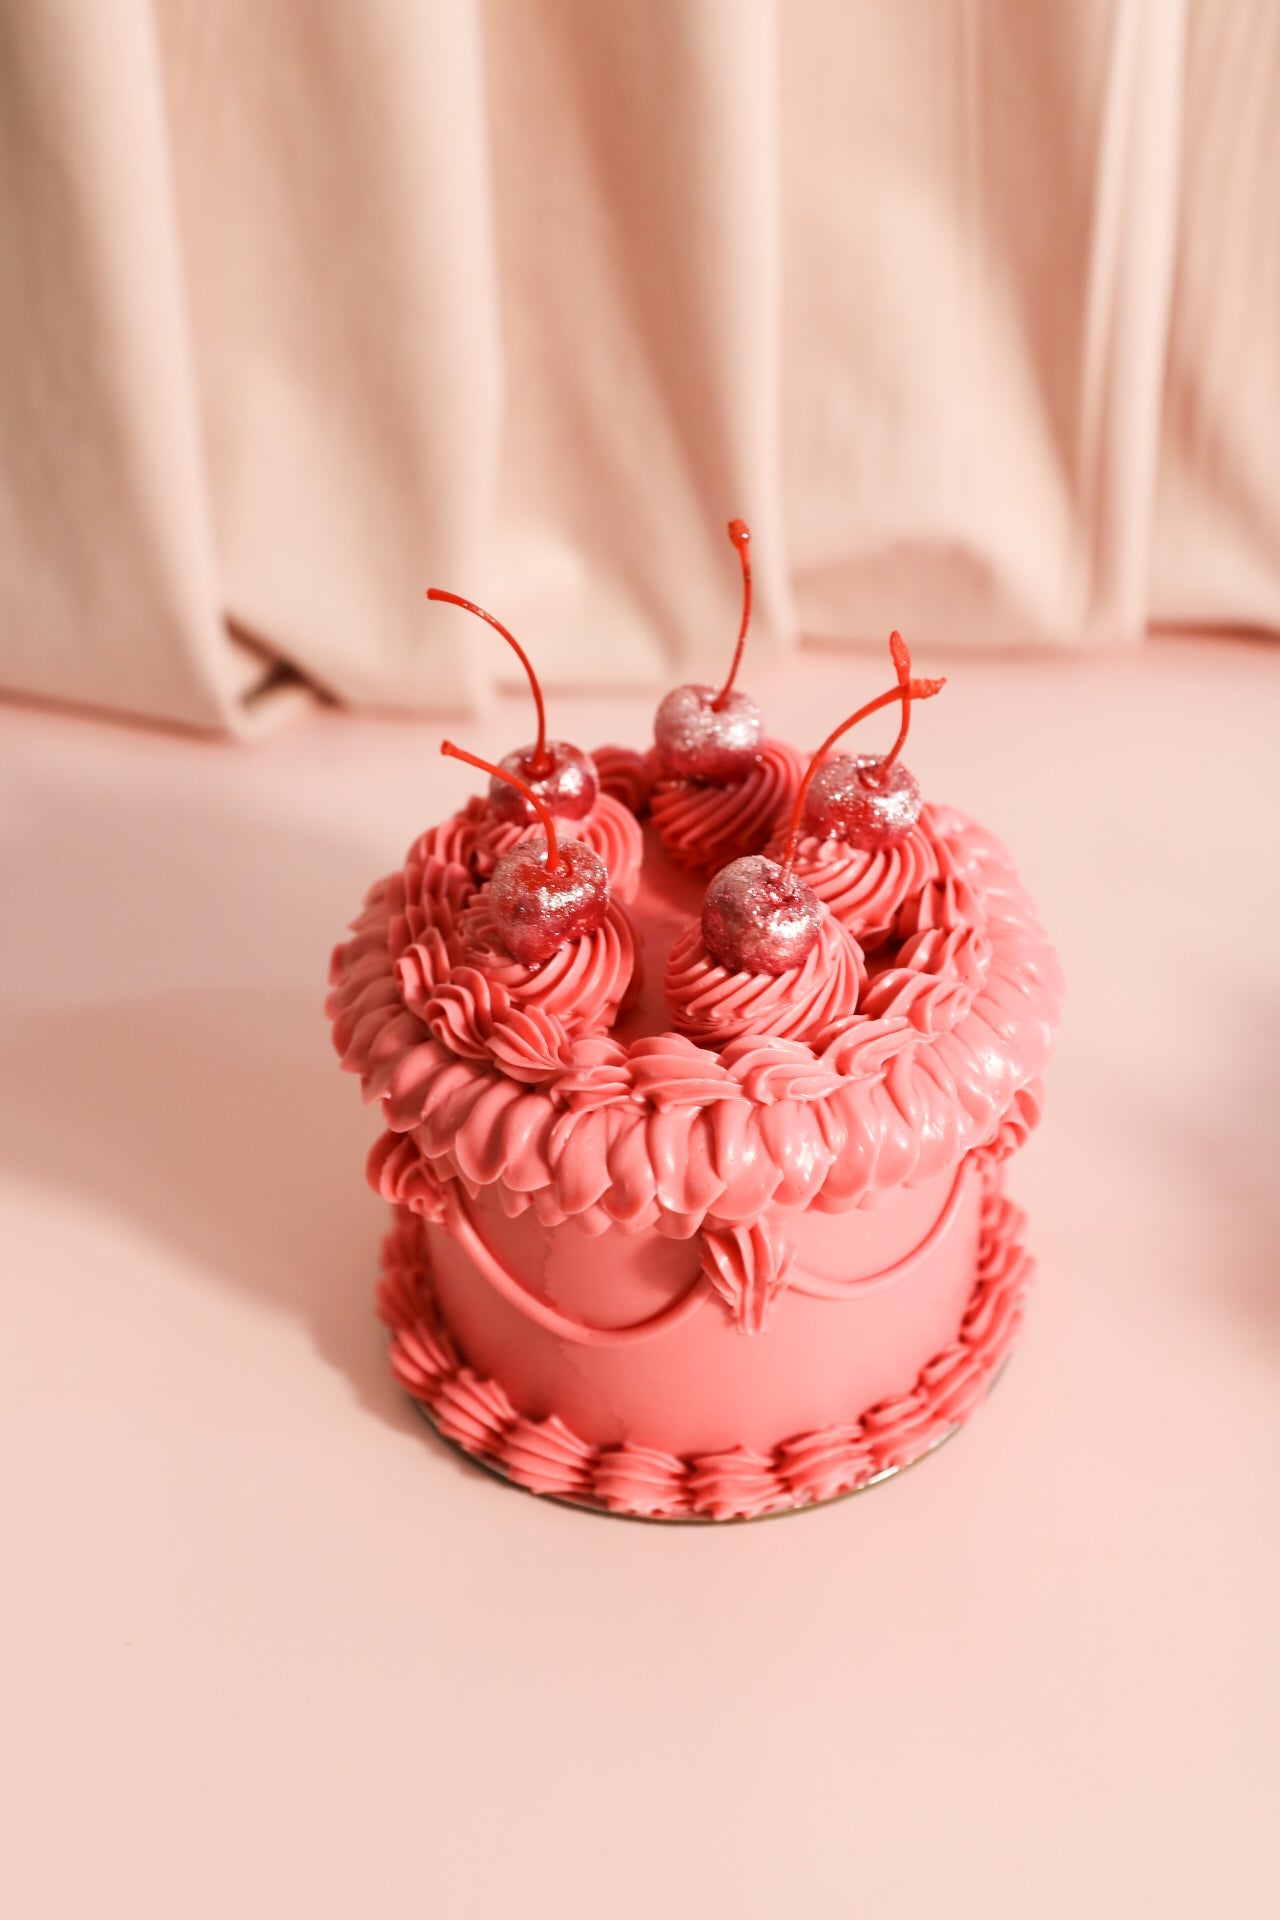 Pink cake with pink cream ruffles and five glittery red cherries on top of the cake.